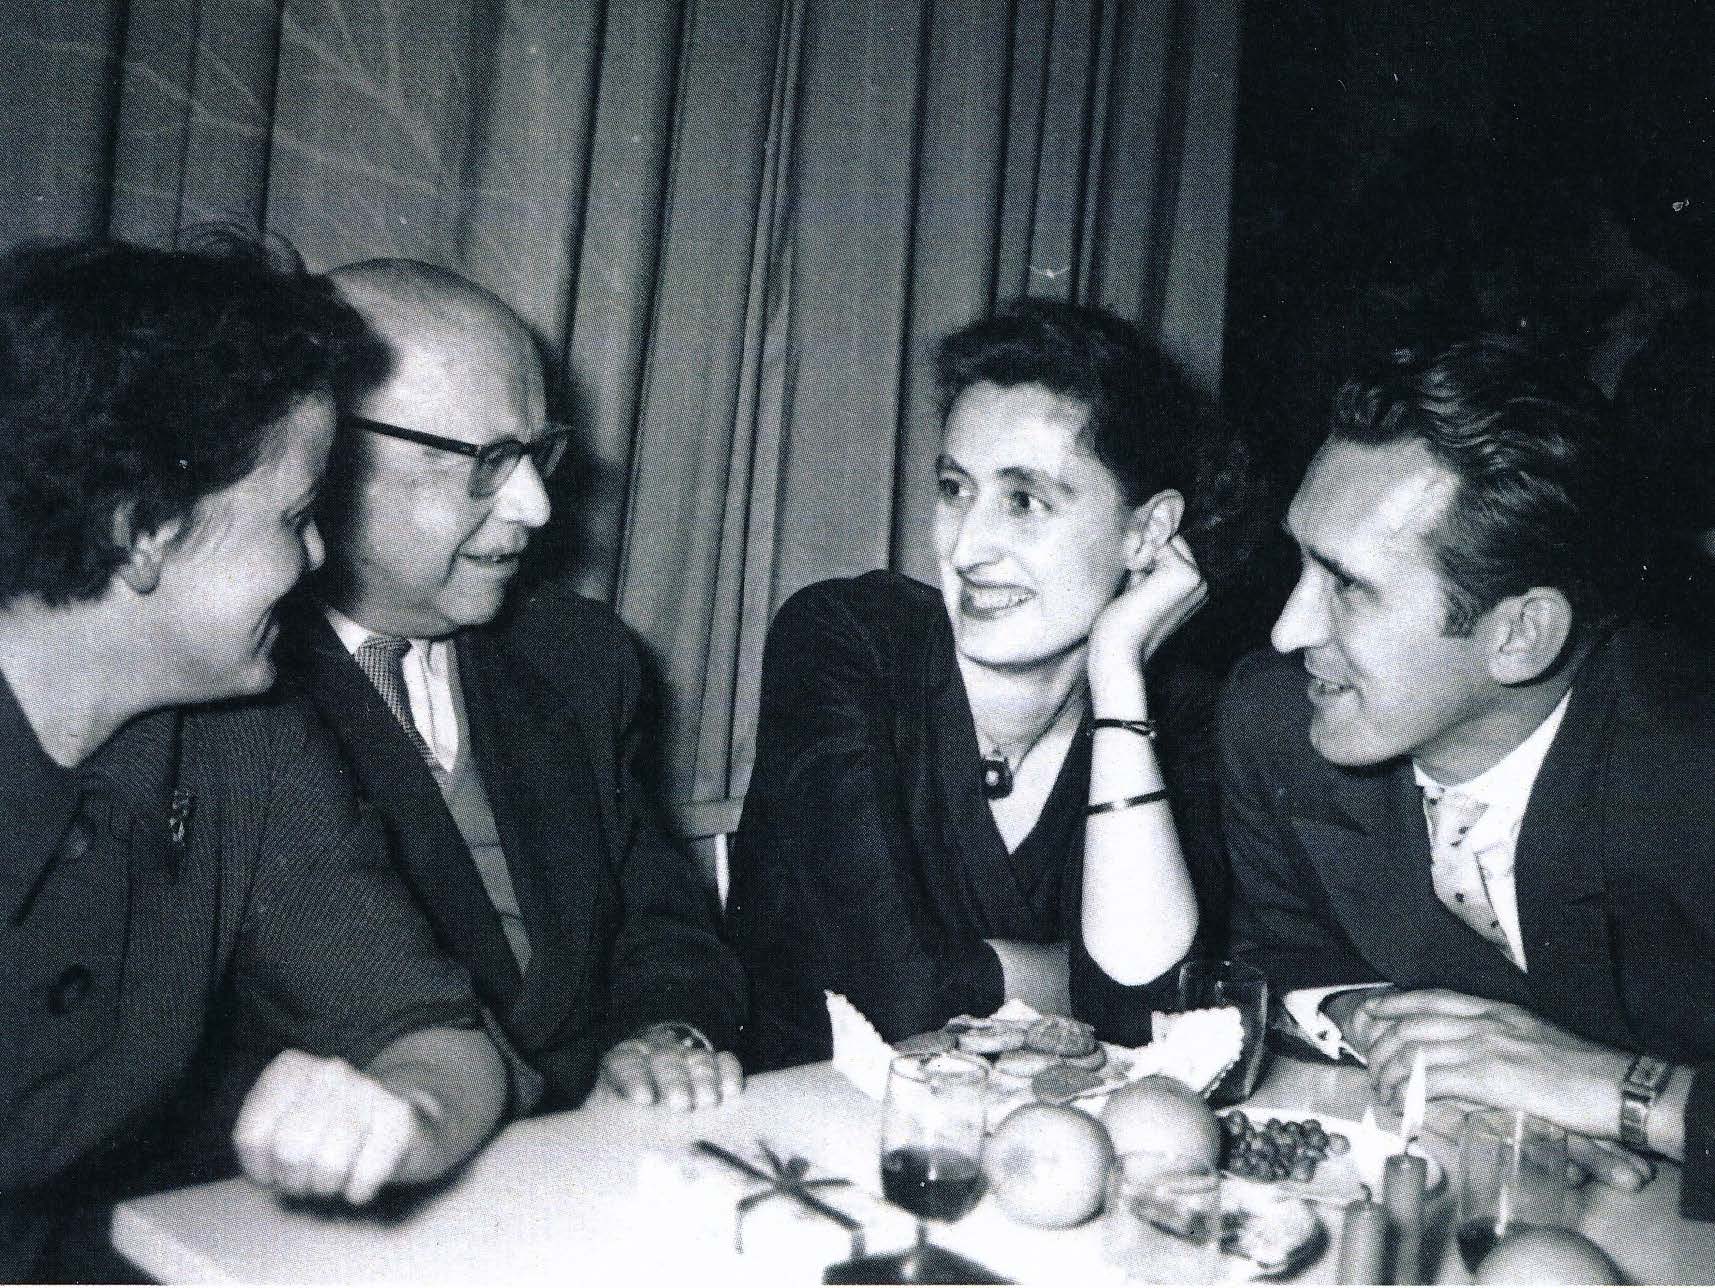 Frau Doktor Marianne Riegler and Herr Albert Reh, the two on the right side. December 1958 at the JYM Christmas dinner